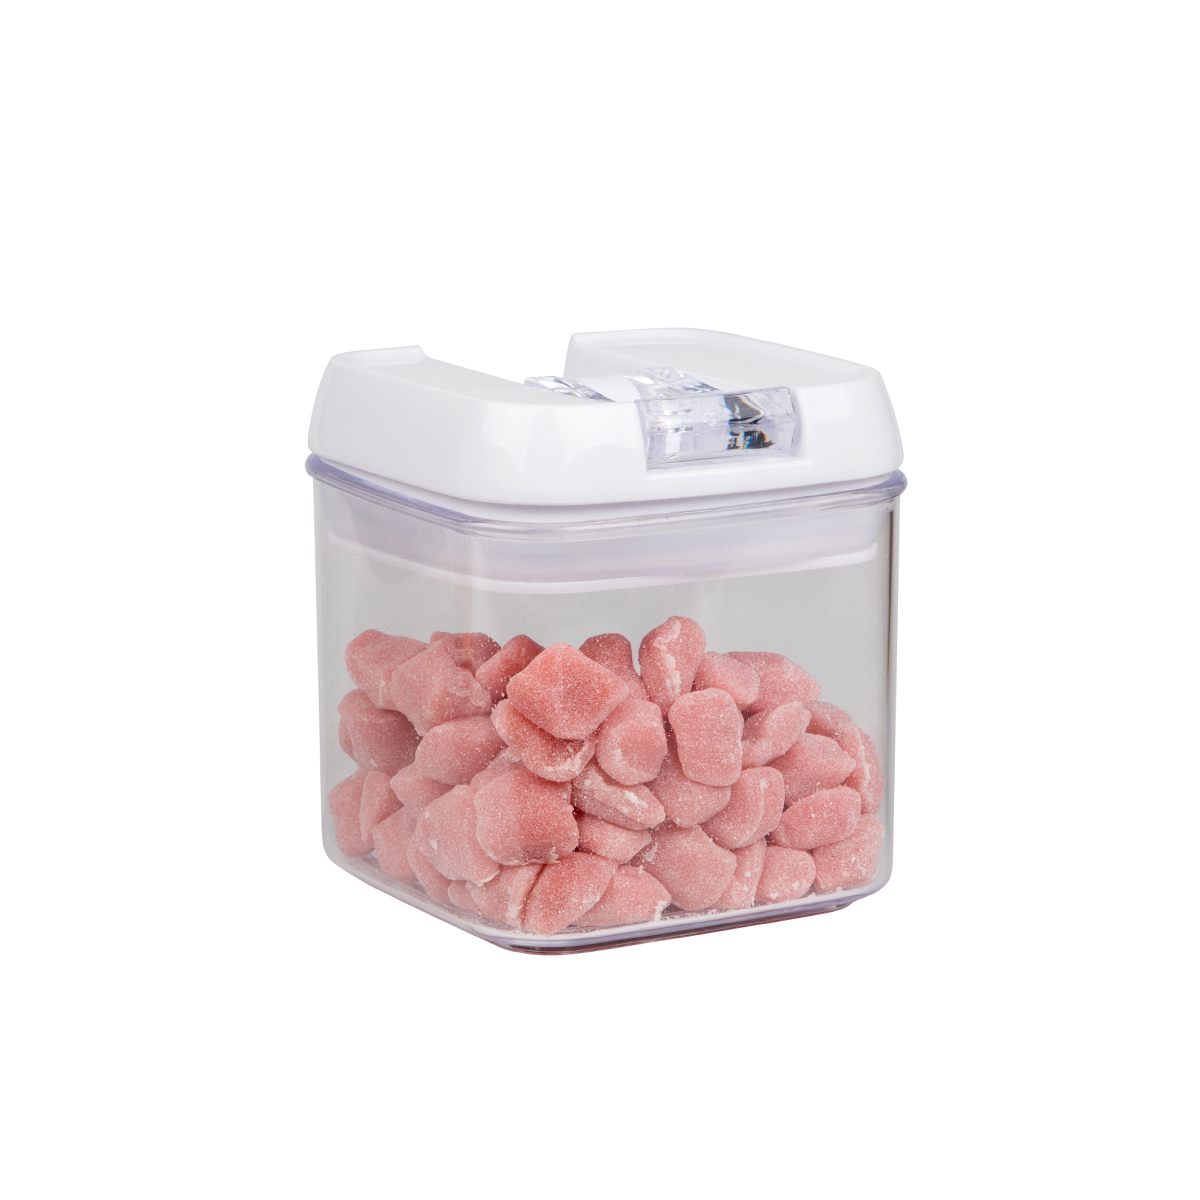 PS 0.5L Food Storage Container 